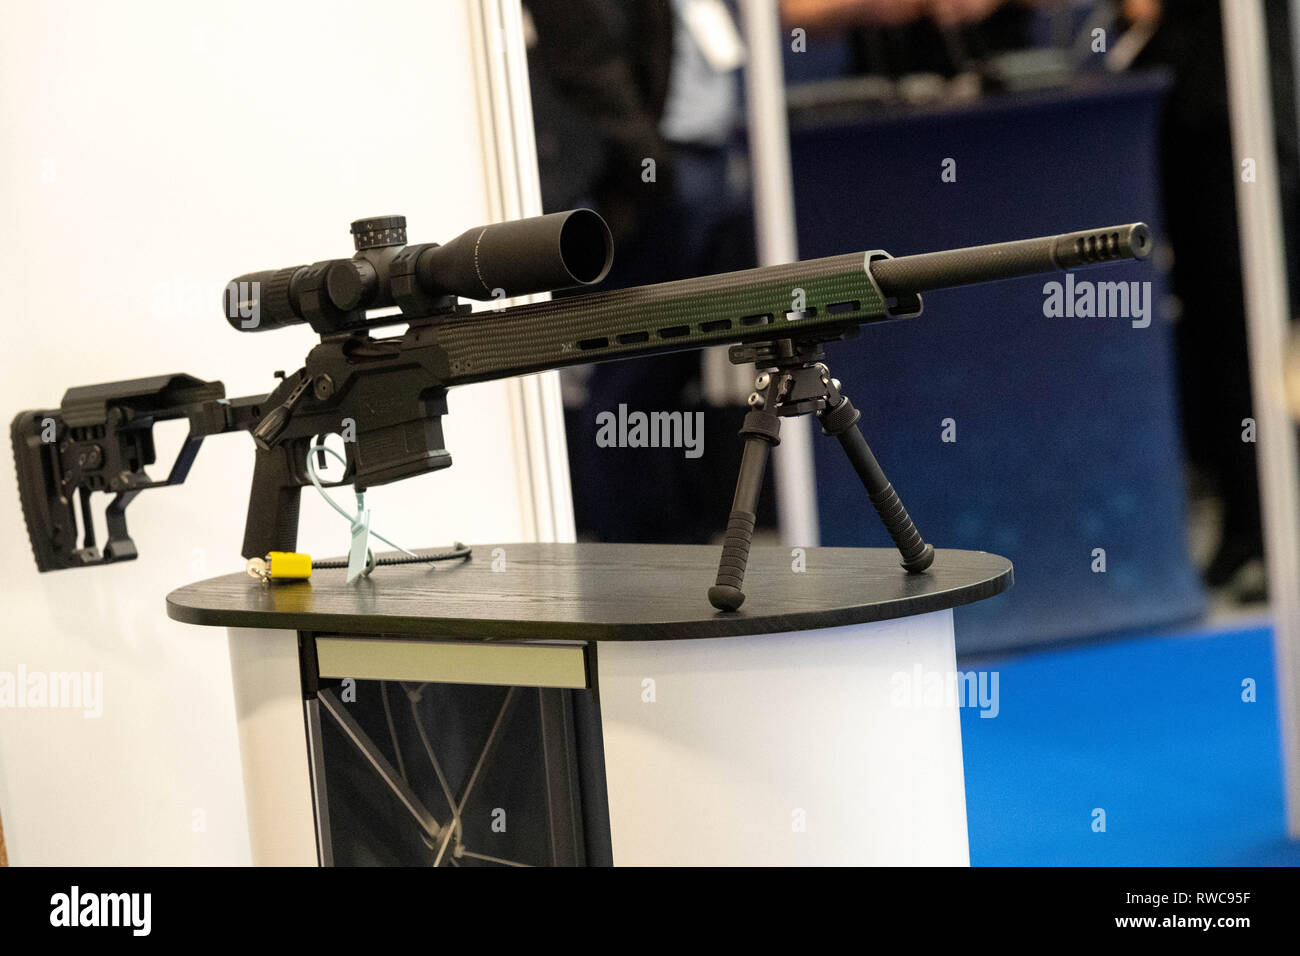 London 6th March 2019 Security and Counter Terror Expo 2019 at Olympia  London Sniper rifle Credit: Ian Davidson/Alamy Live News Stock Photo - Alamy